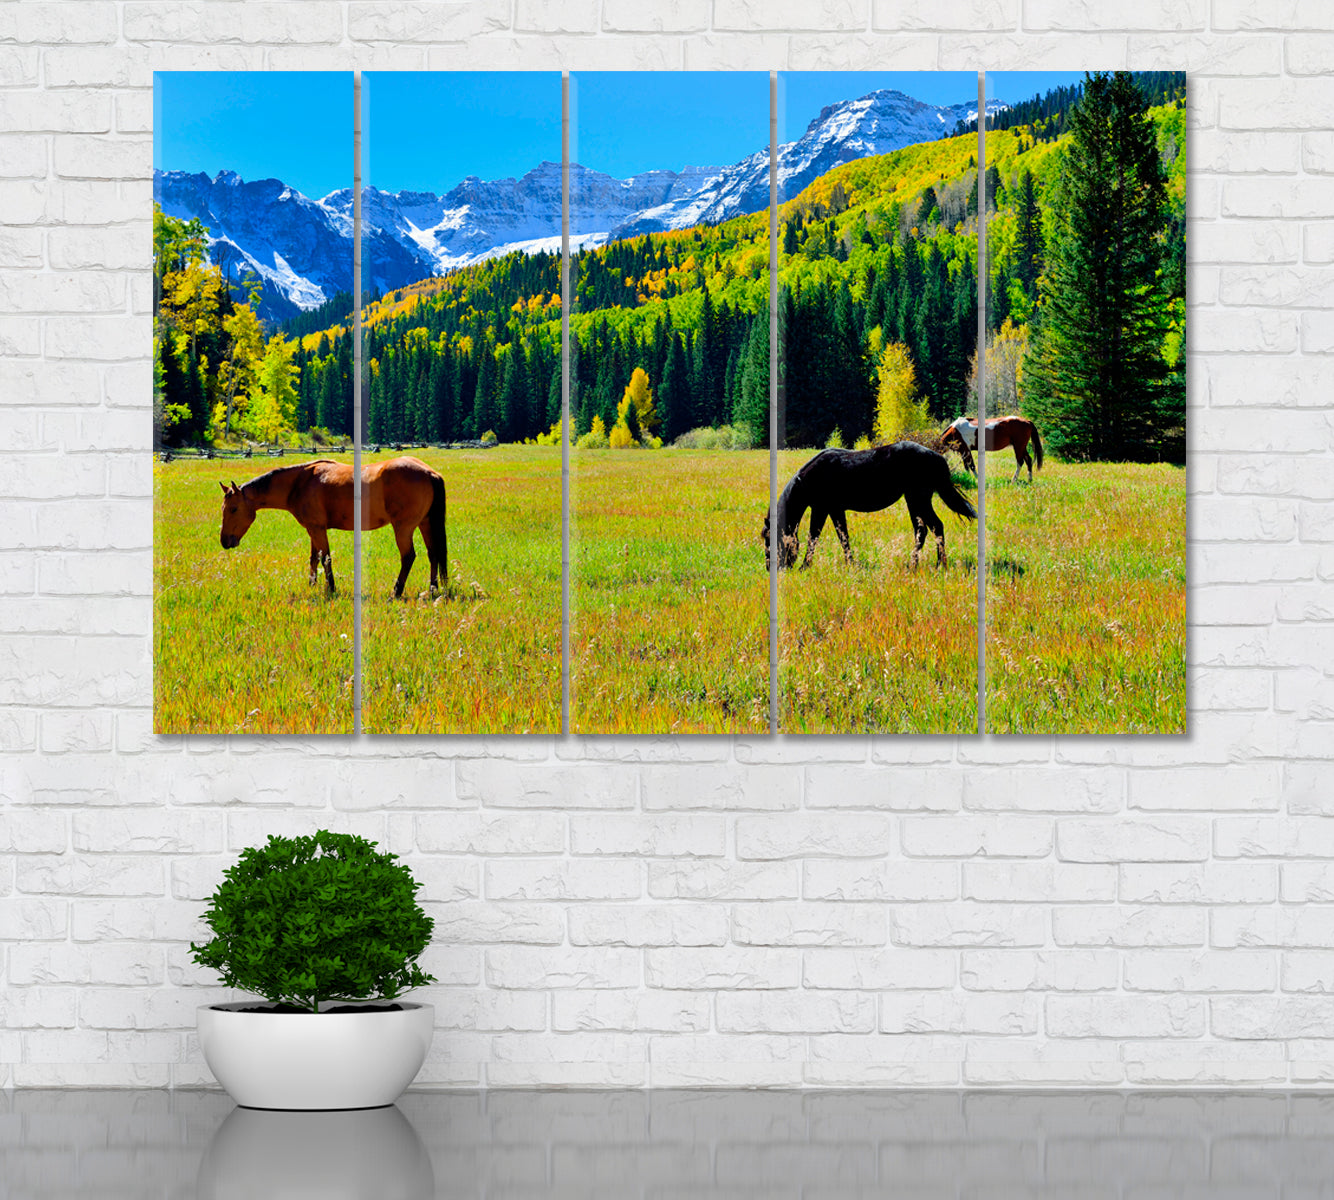 Horses in Rocky Mountains Canvas Print ArtLexy 5 Panels 36"x24" inches 